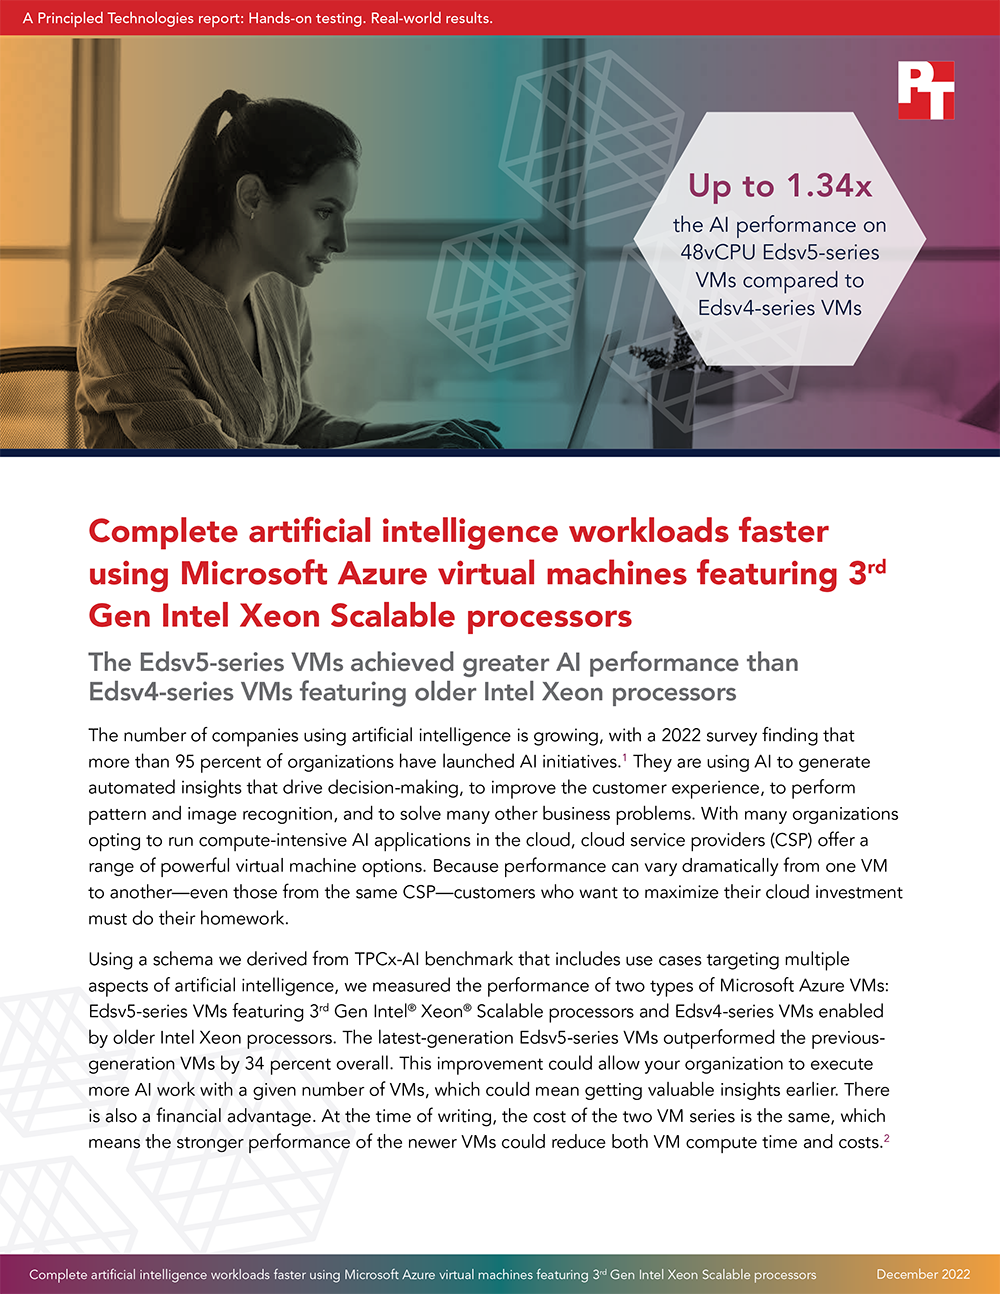 Principled Technologies Proves Microsoft Azure Edsv5-Series VMs with 3rd Gen Intel Xeon Scalable Processors Outperformed Previous-Generation Counterparts on AI Workload